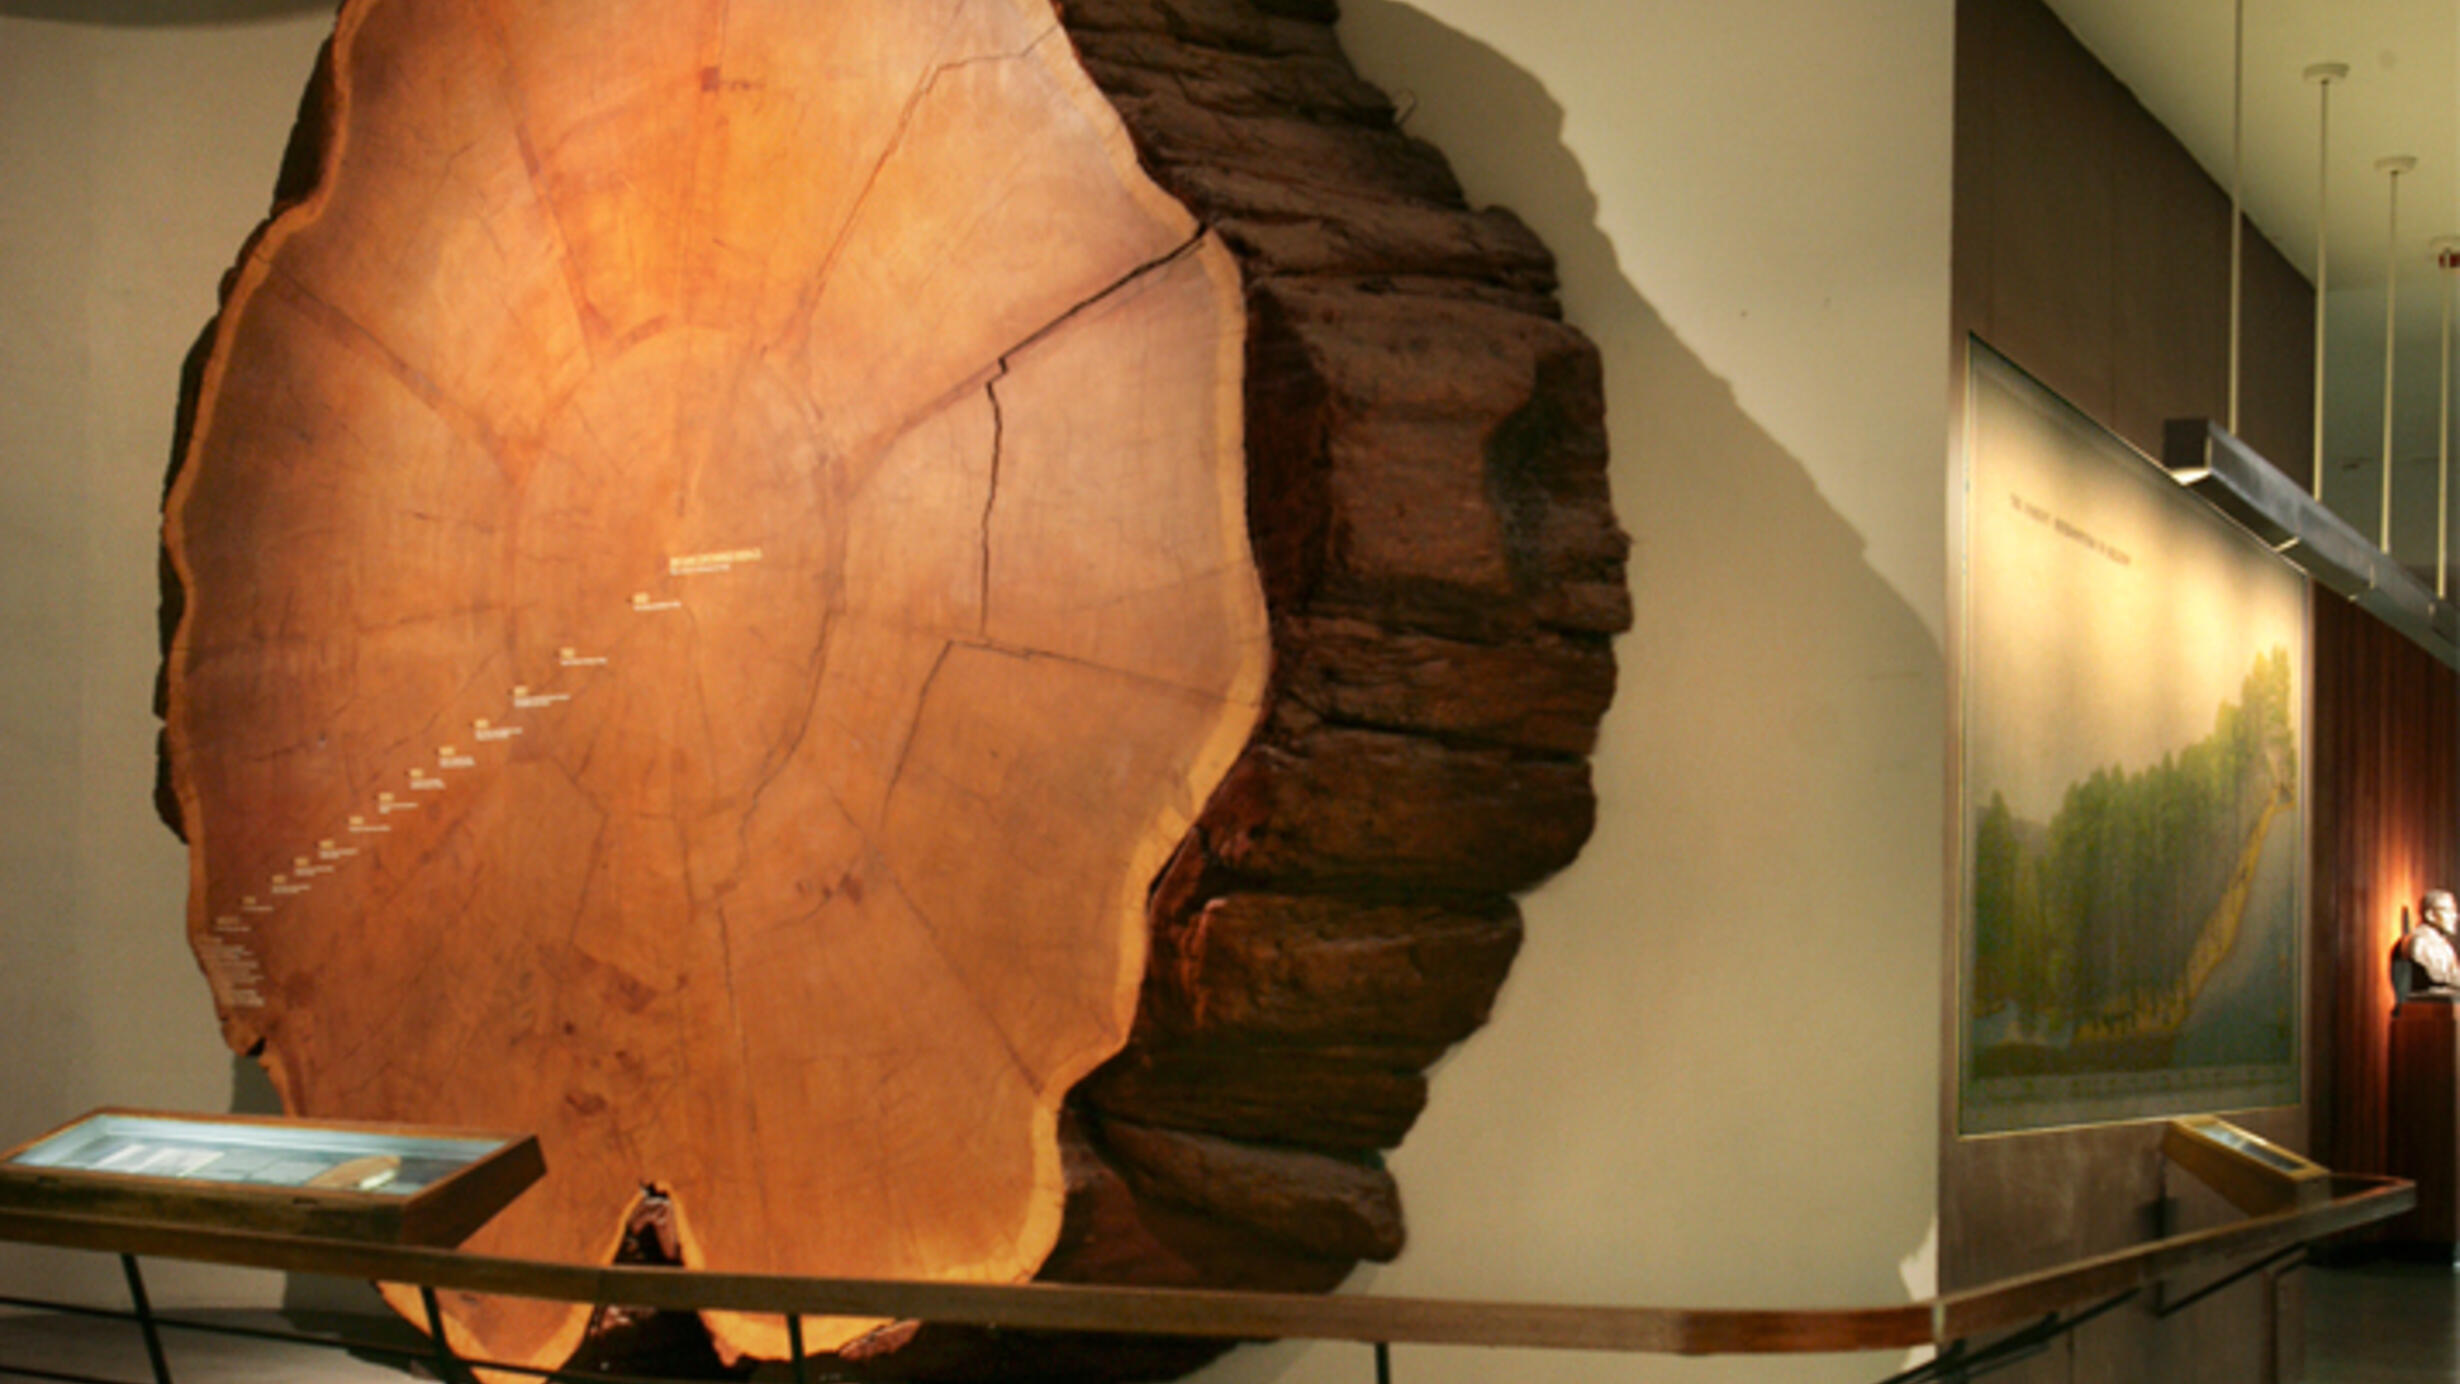 A cross-cut sample of a massive tree against a white Museum wall.